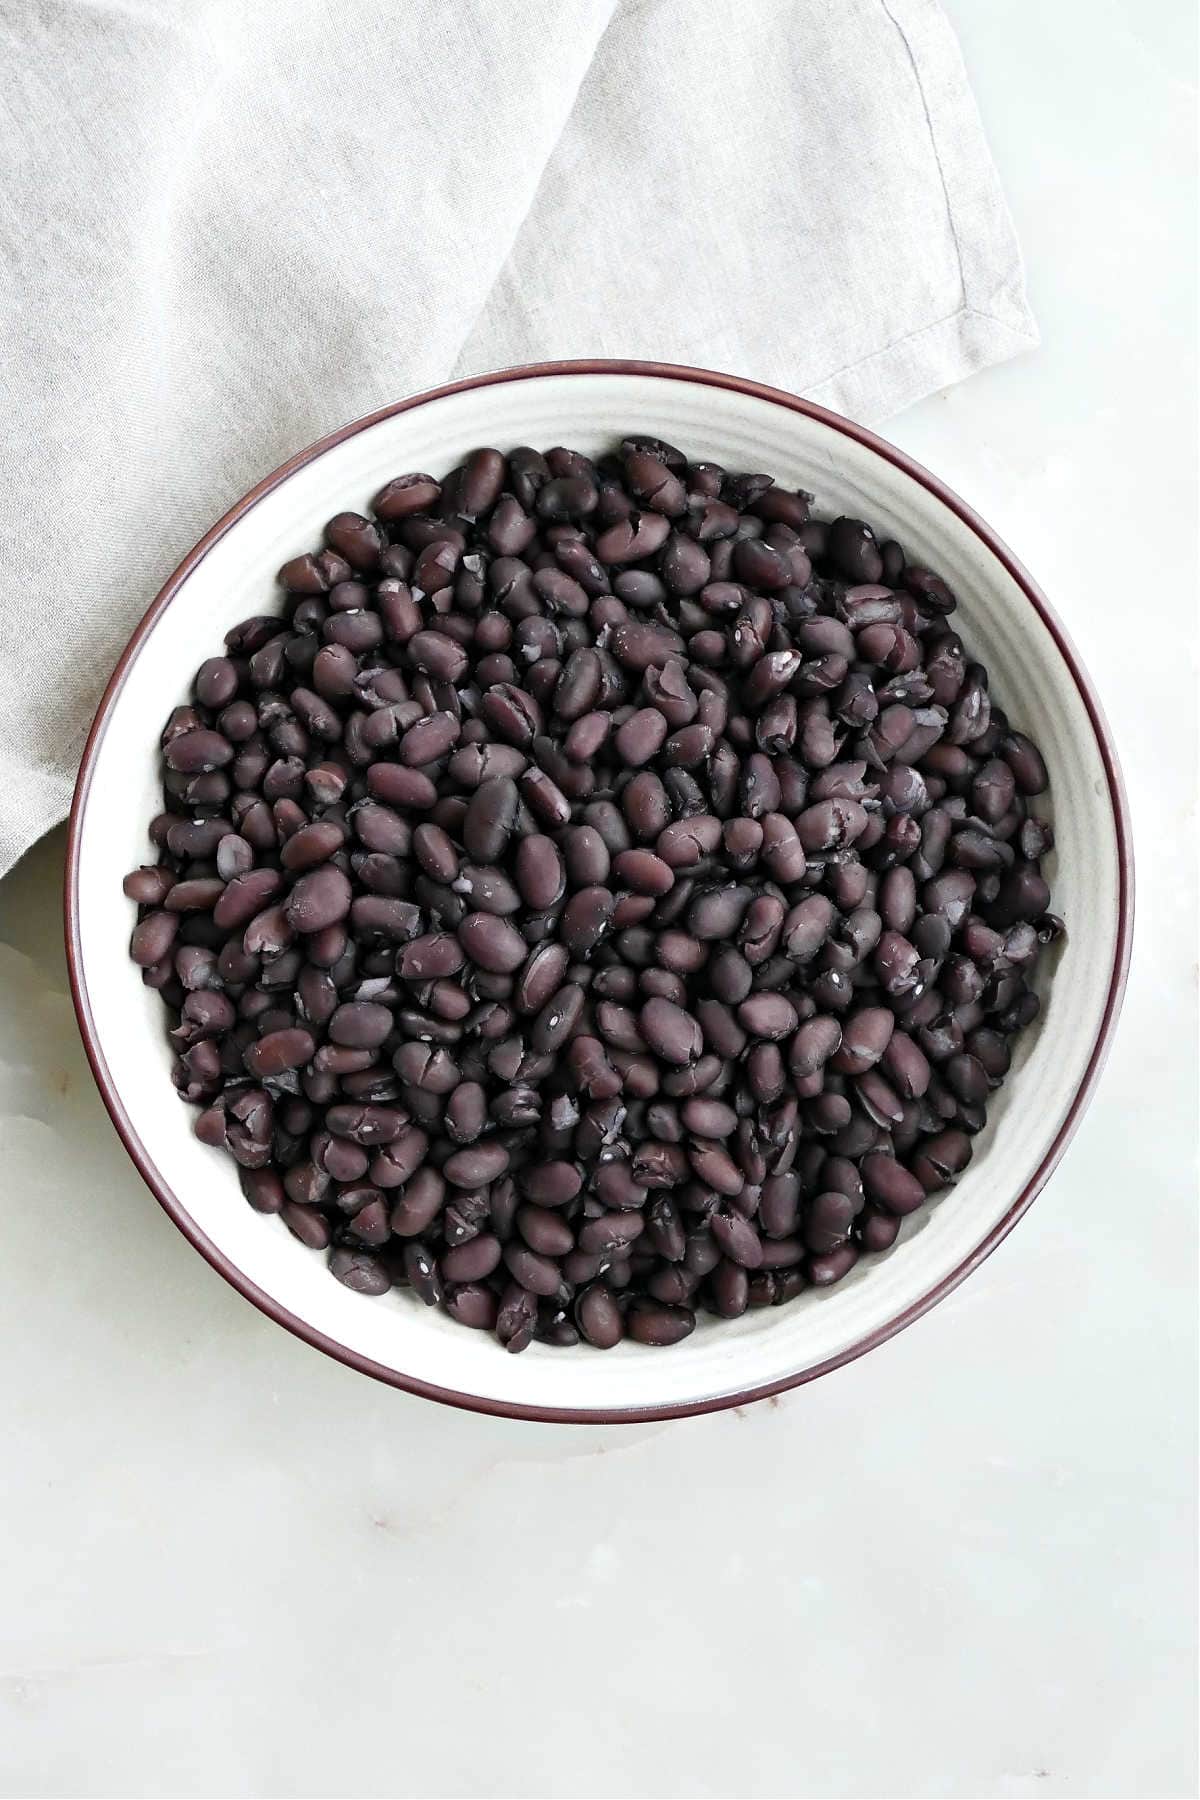 A large serving bowl of cooked black beans next to a white kitchen towel.